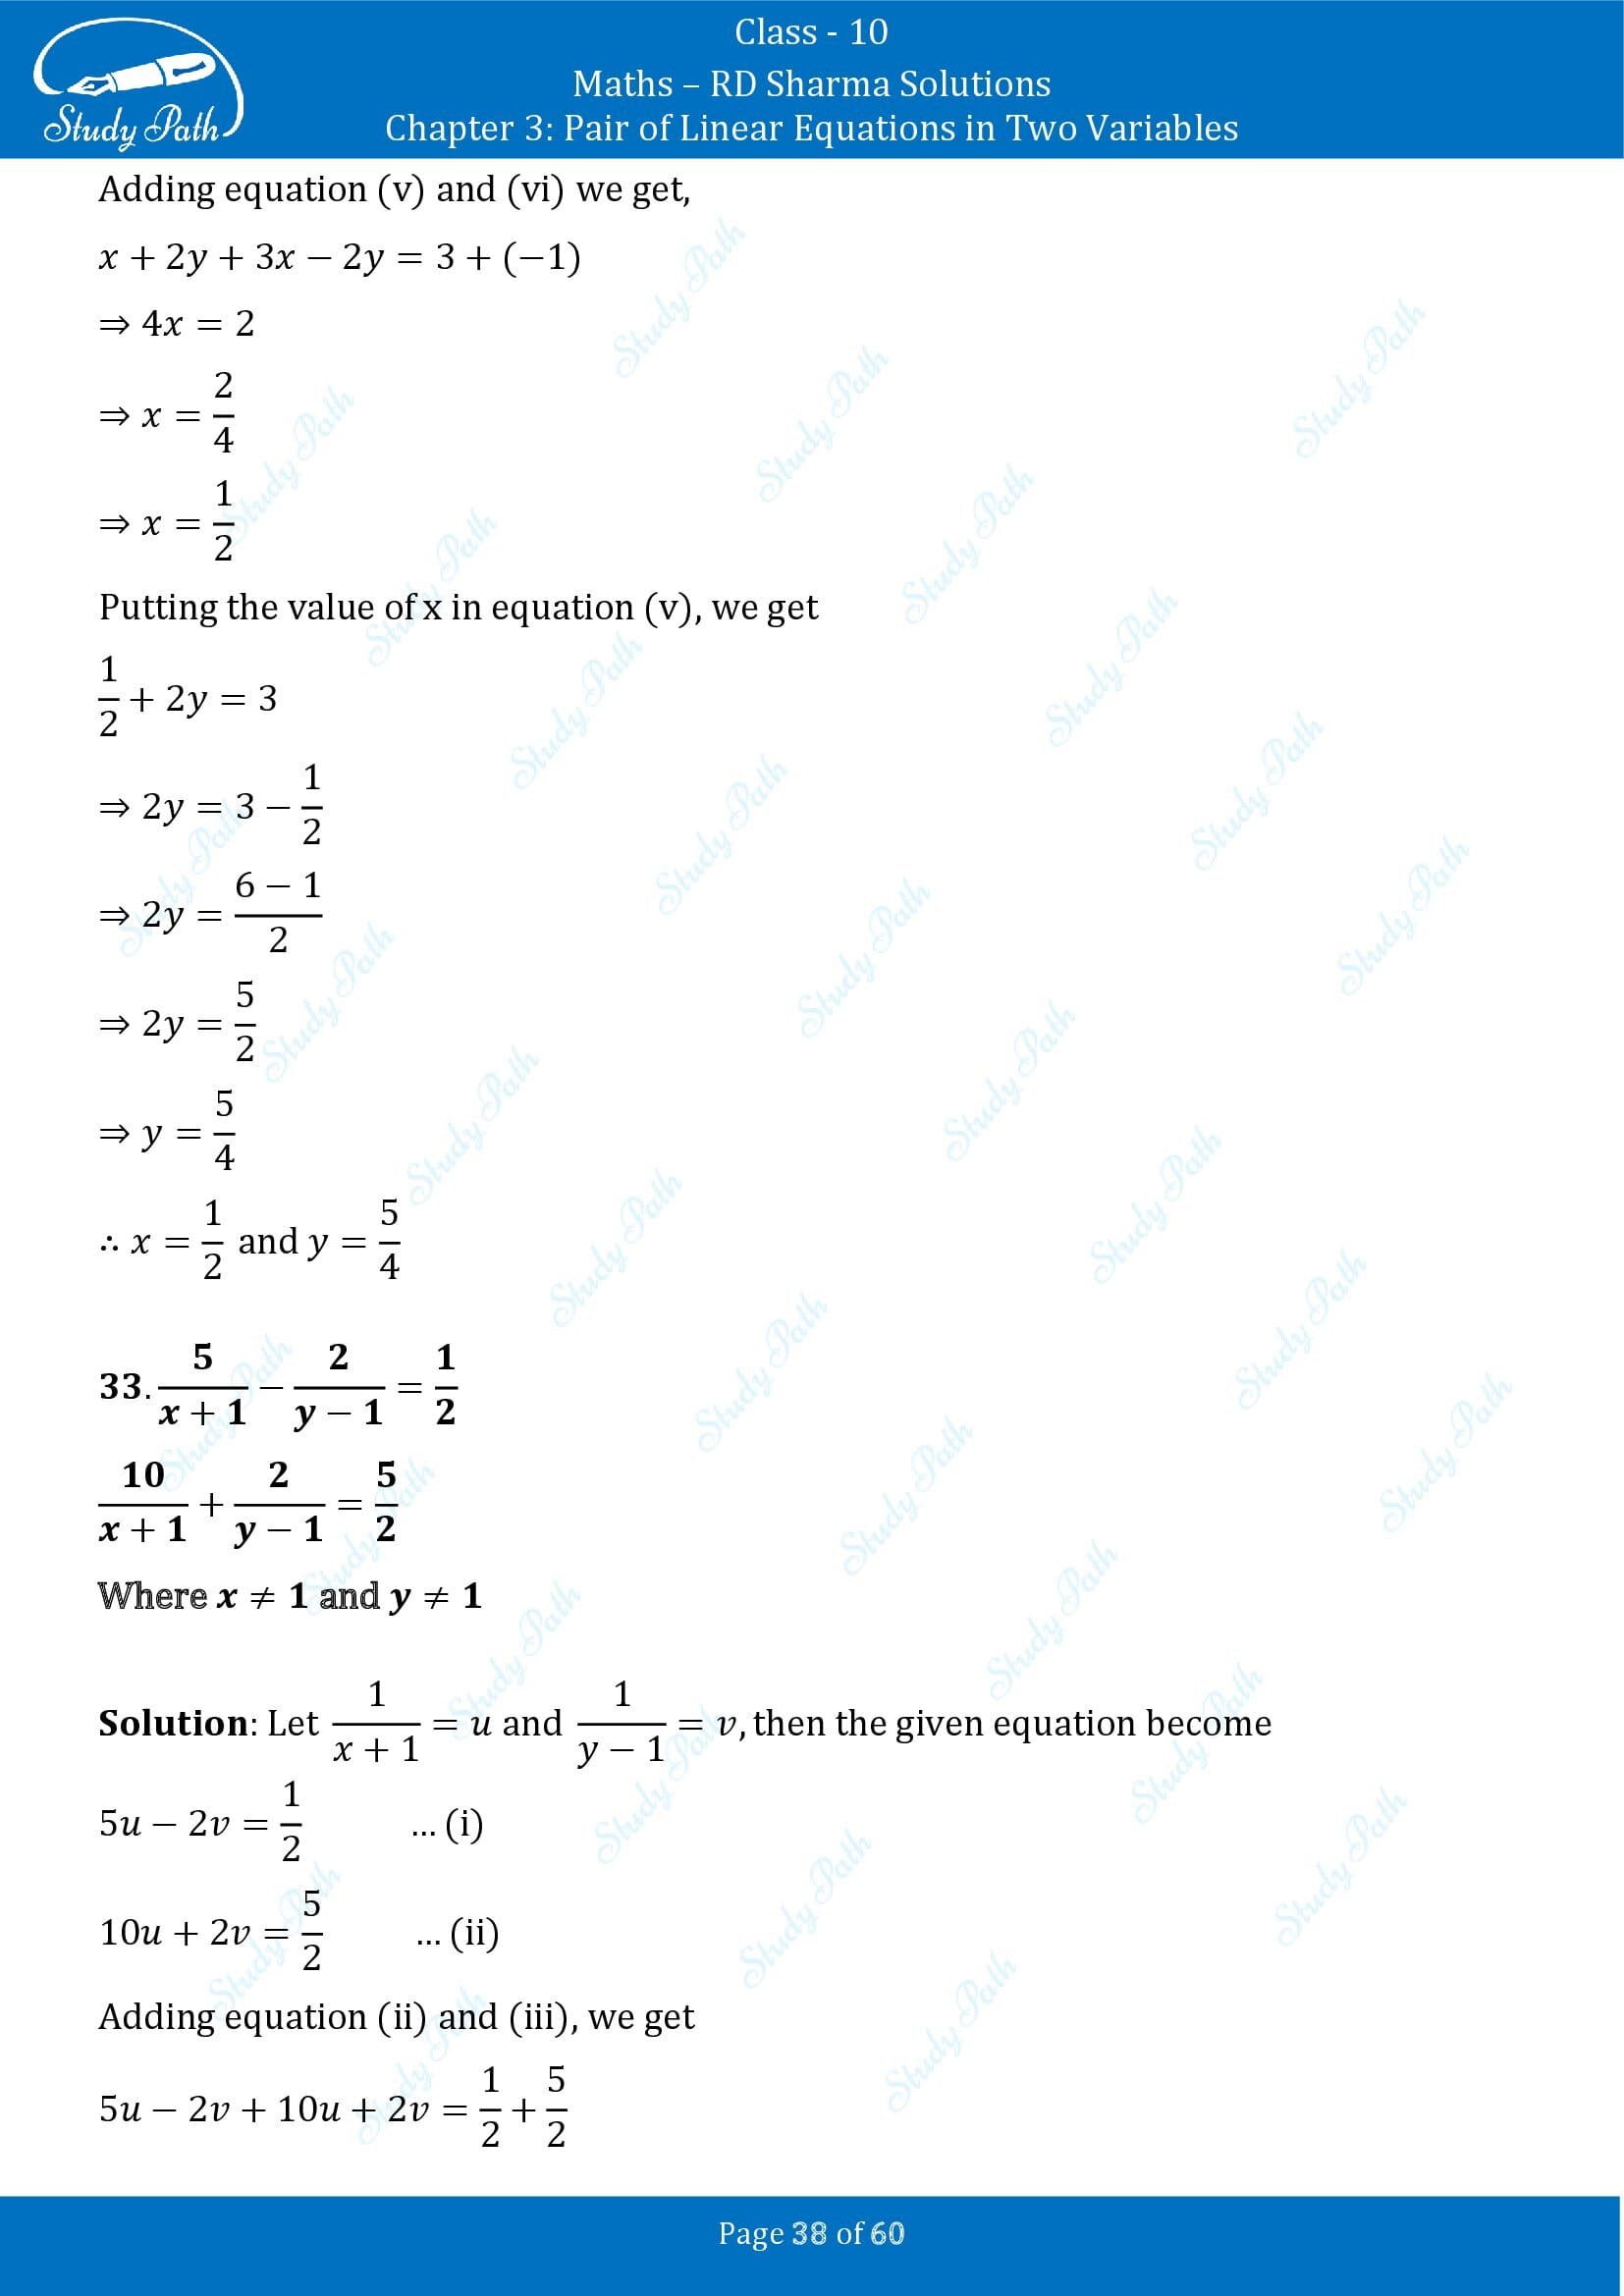 RD Sharma Solutions Class 10 Chapter 3 Pair of Linear Equations in Two Variables Exercise 3.3 00038